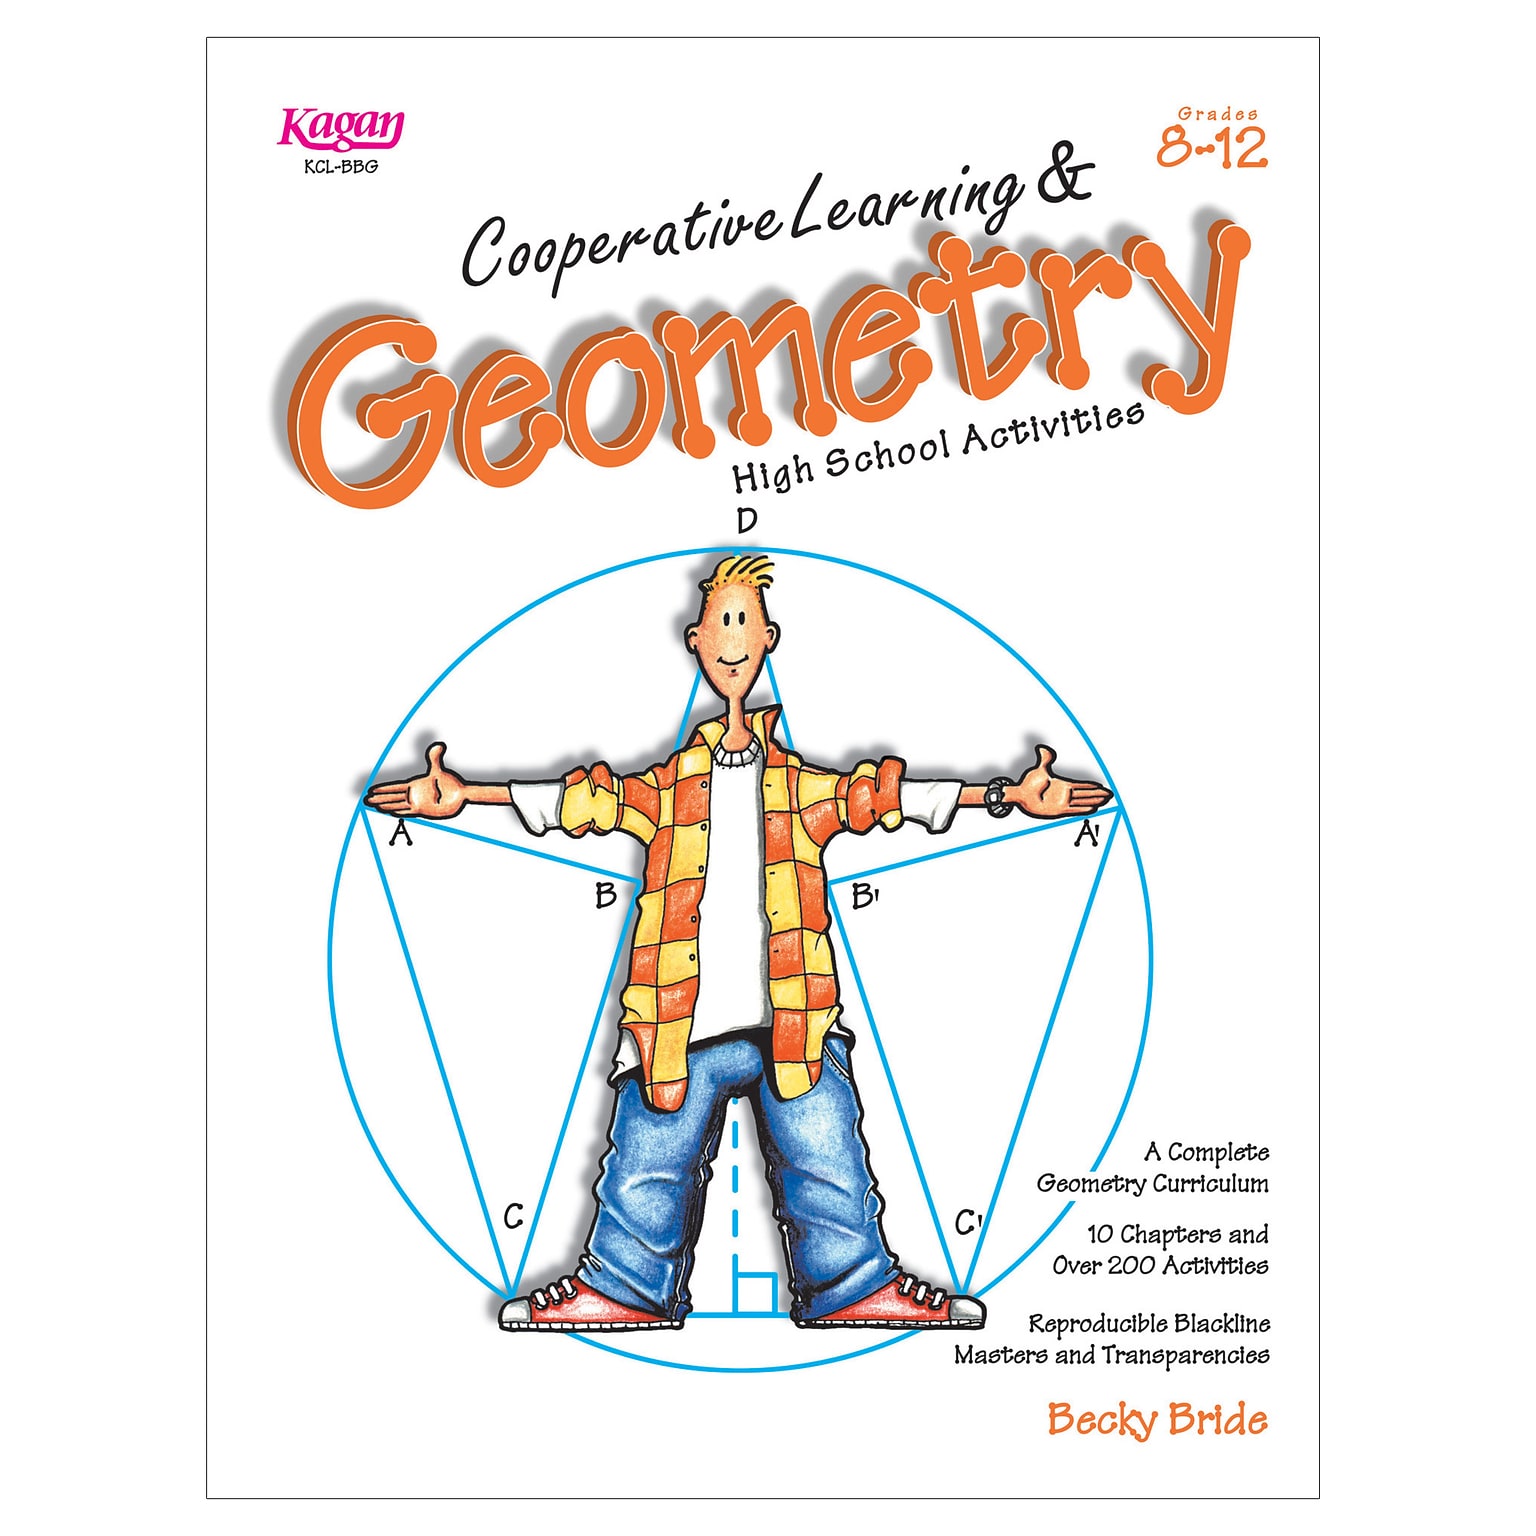 Cooperative Learning & Geometry High School Activities Book for Grades 8-12 (KA-BBG)